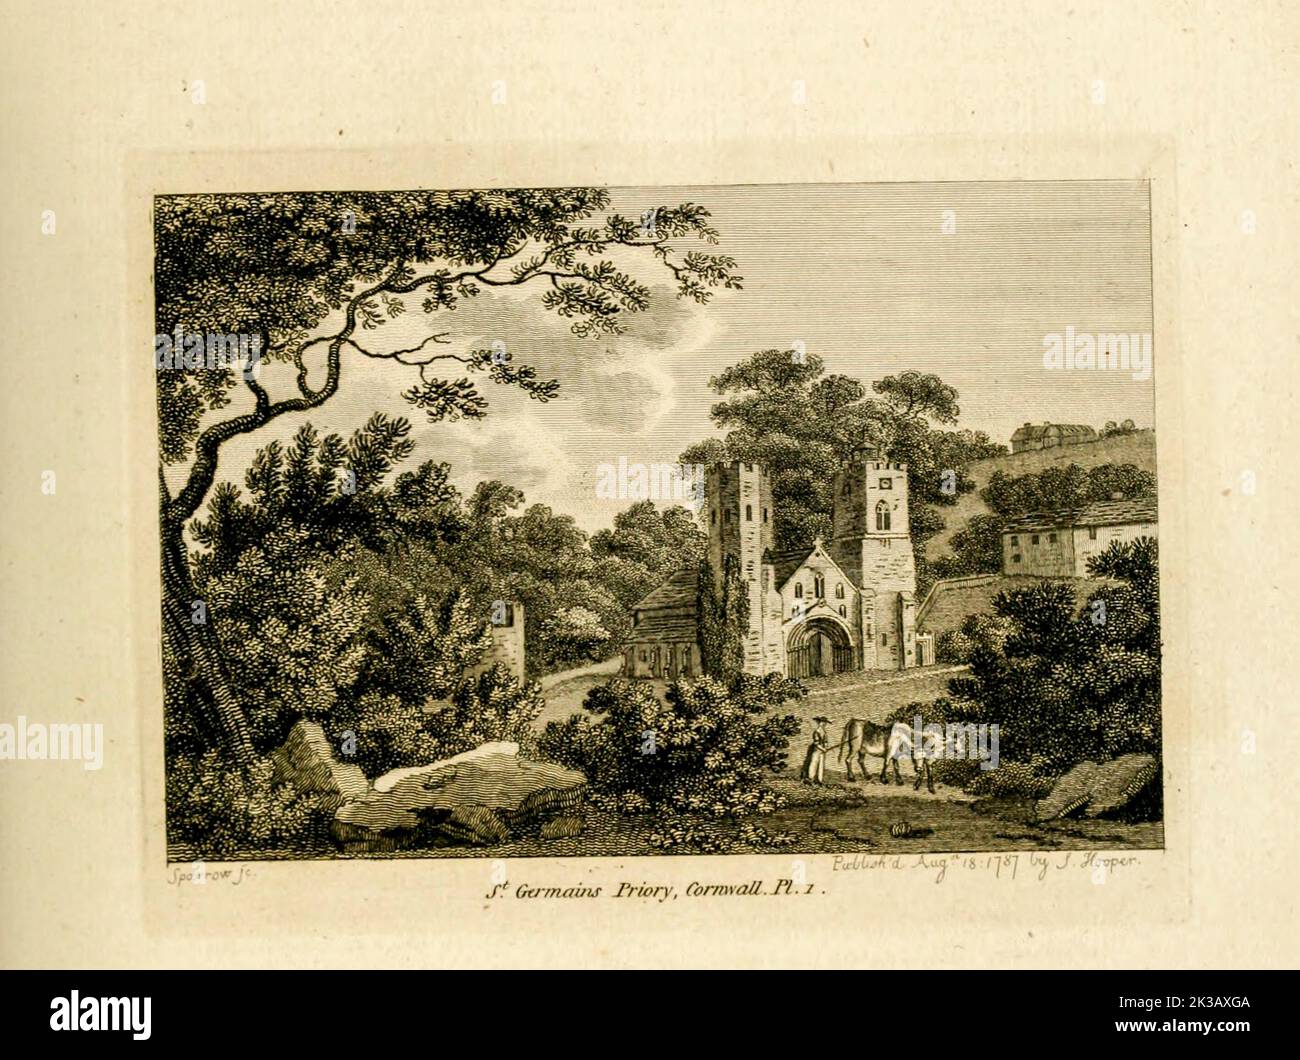 ST. GERMAIN'S Priory, Cornwall St German's Priory is a large Norman church in the village of St Germans in south-east Cornwall, England, UK.  from the book ' Supplement to the antiquities of England and Wales ' by Francis Grose, Publication date 1777 Stock Photo